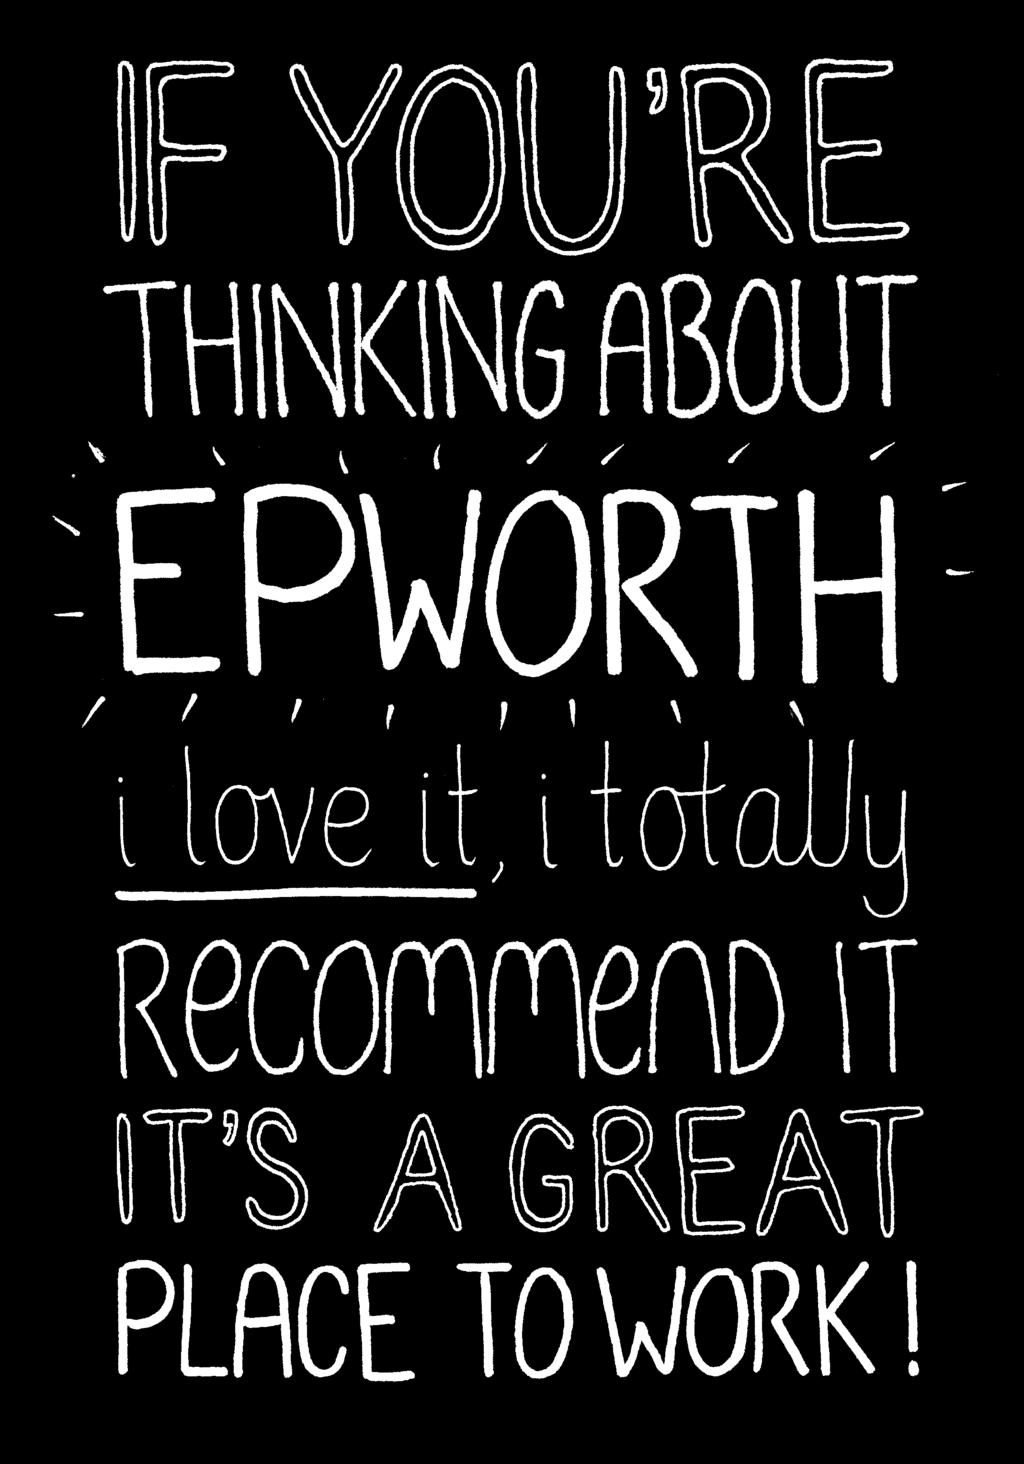 Epworth HealthCare prides itself on communicating its values of respect, excellence, community, compassion, integrity and accountability, and delivering on them in a real and meaningful way.